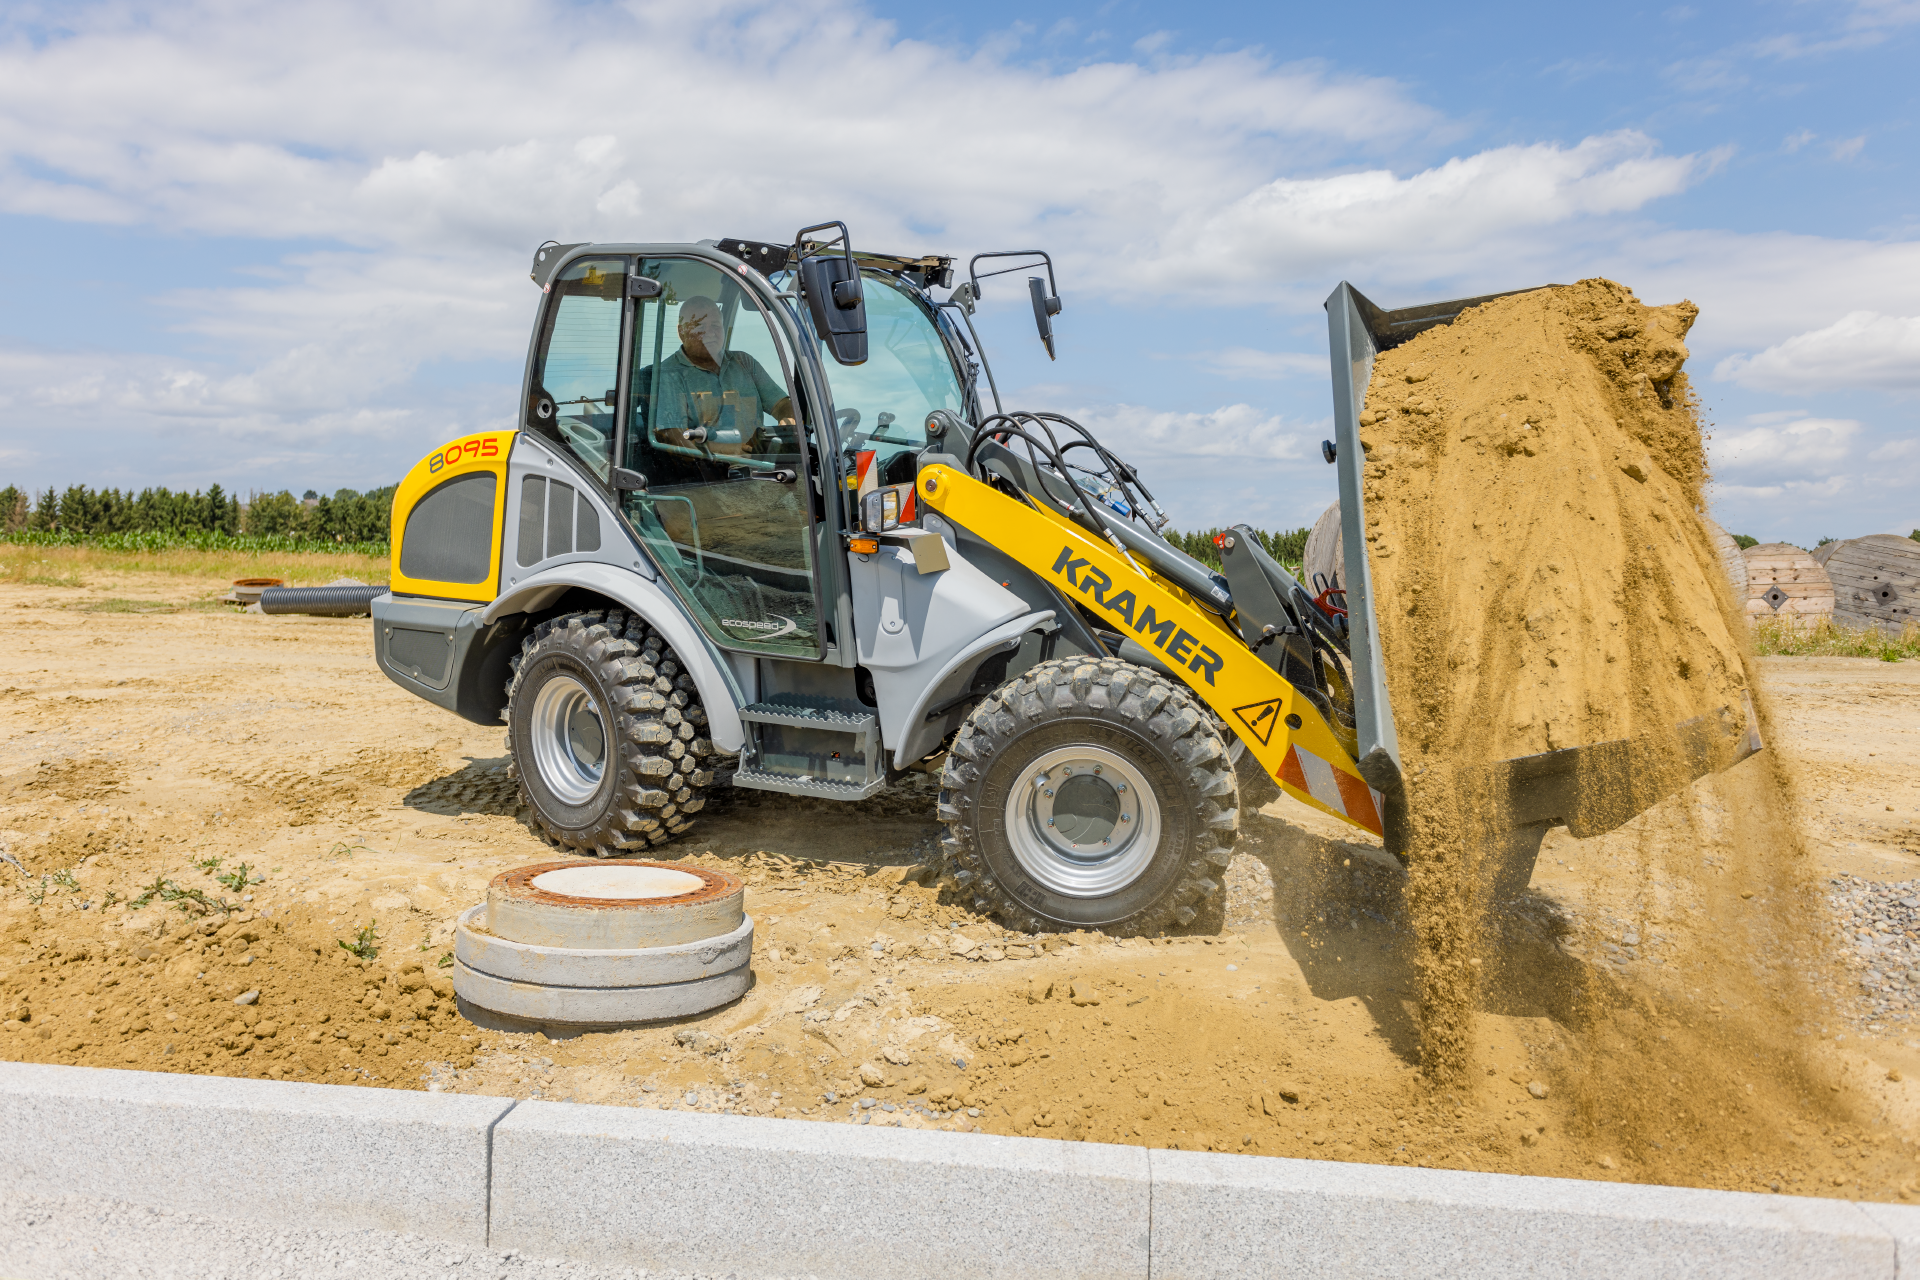 The Kramer wheel loader 8095 while working with soil.